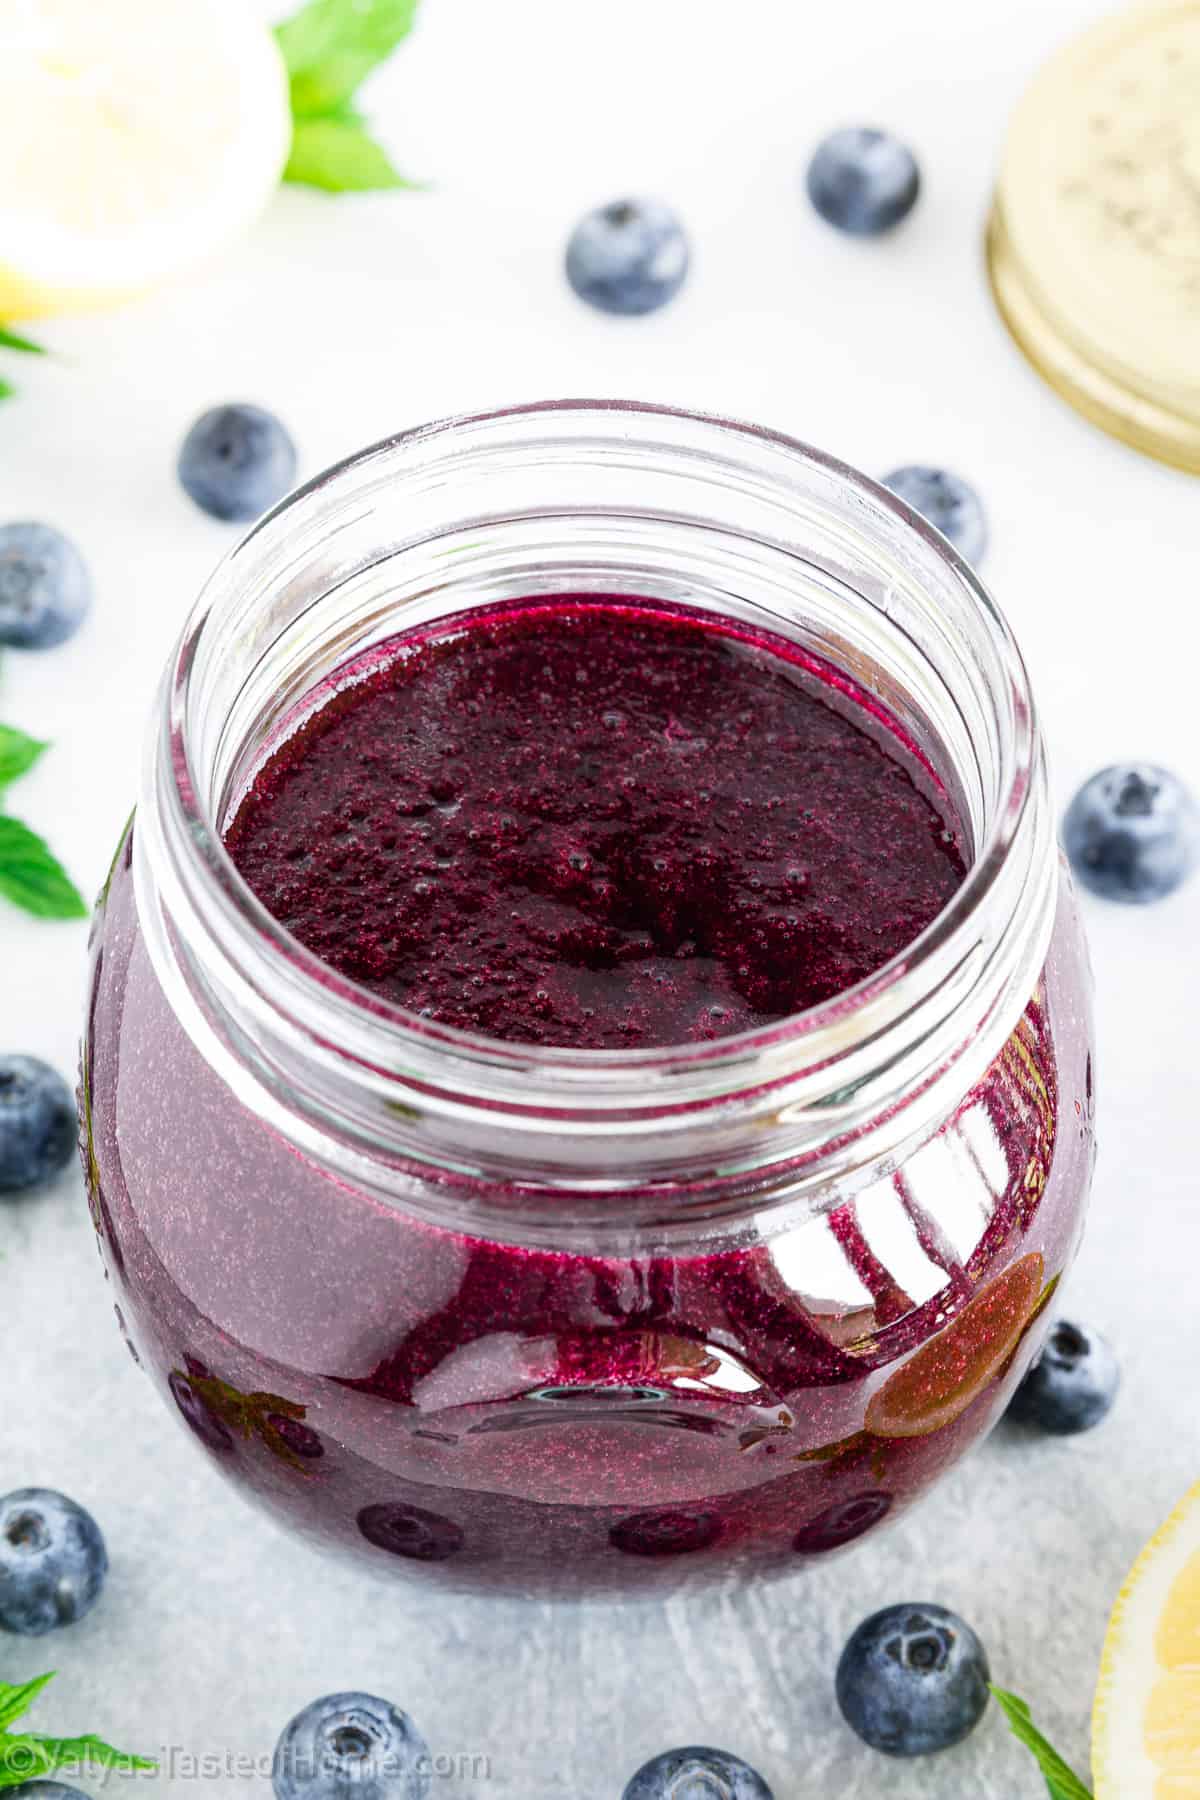 This homemade blueberry sauce is made with just three ingredients, including plump blueberries, sugar, and a hint of tangy lemon juice and strikes the perfect balance between sweet and tart.